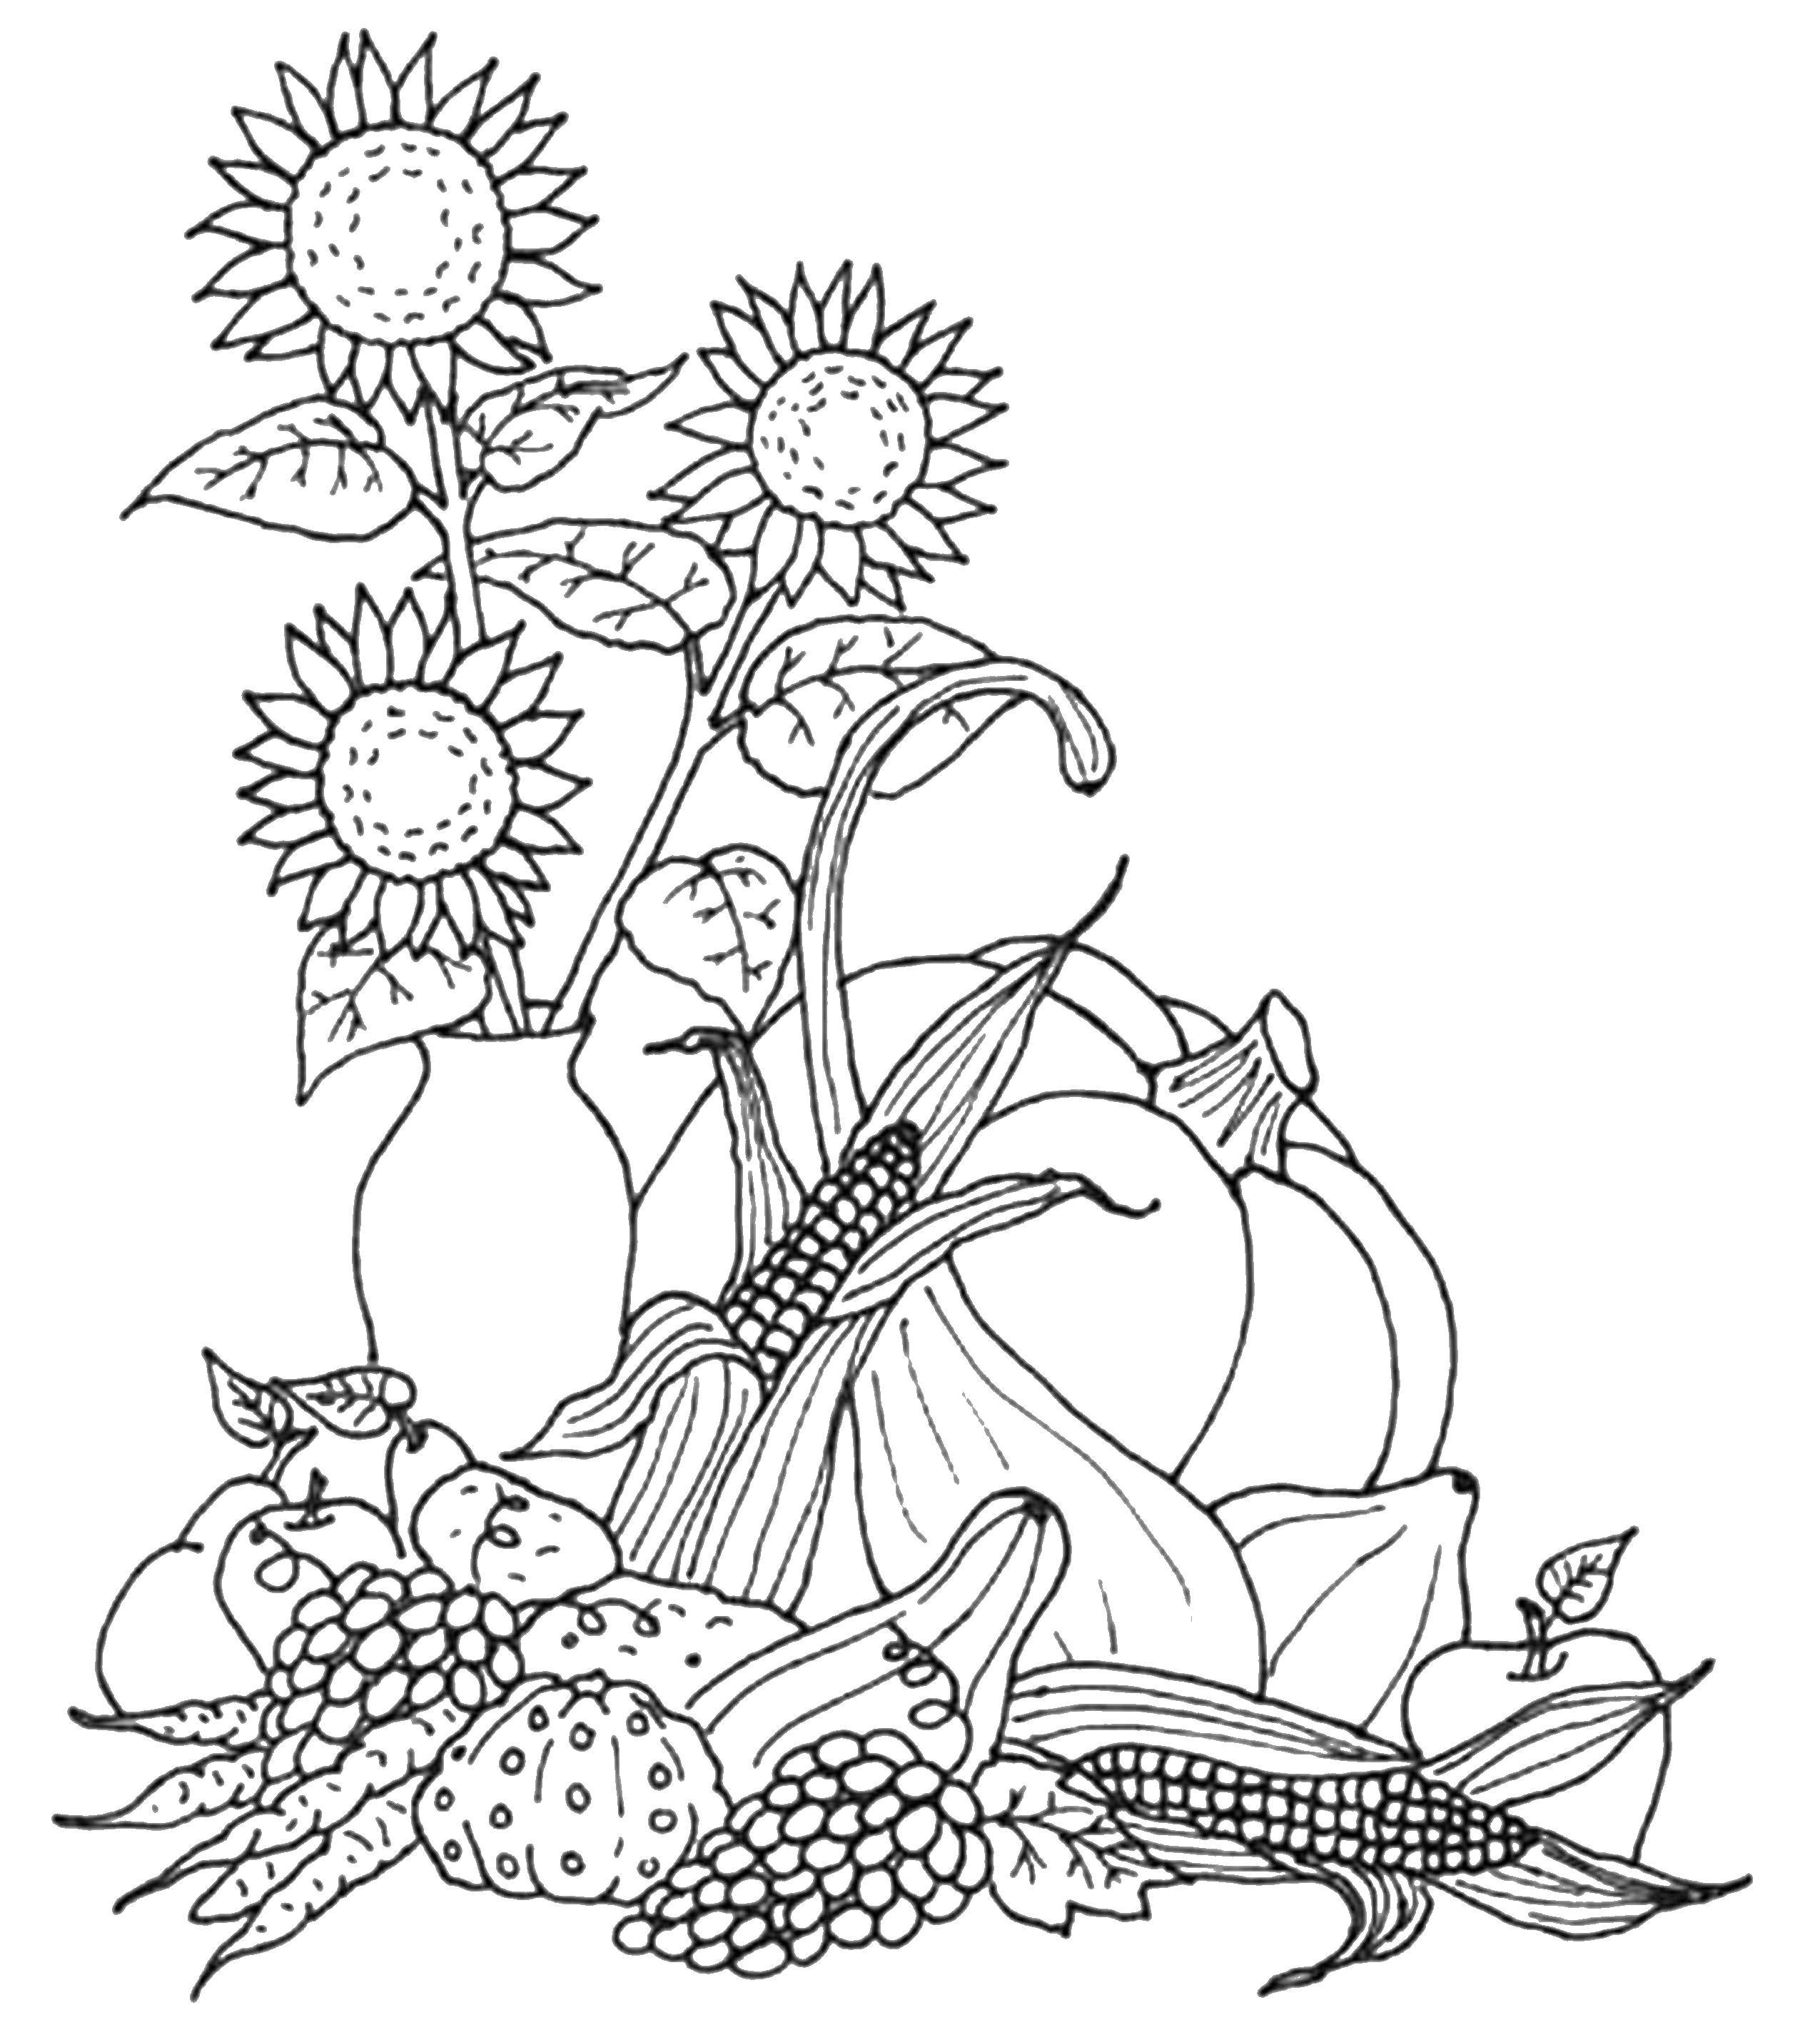 Coloring Sunflowers and harvest. Category Autumn. Tags:  that autumn, the harvest, sunflowers.